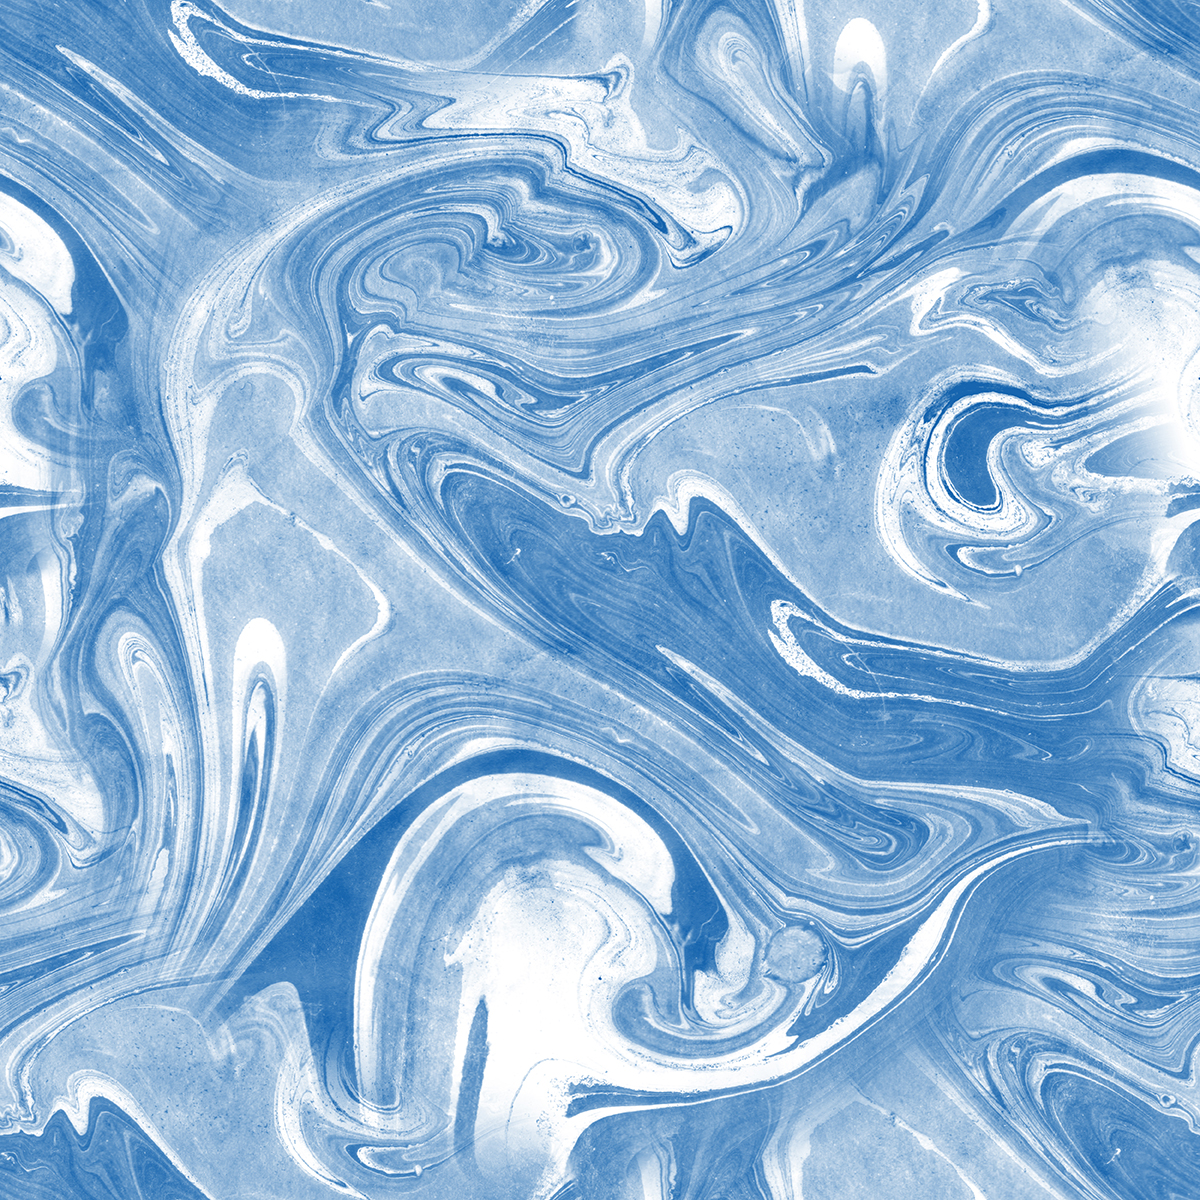 A close up of a blue and white swirl